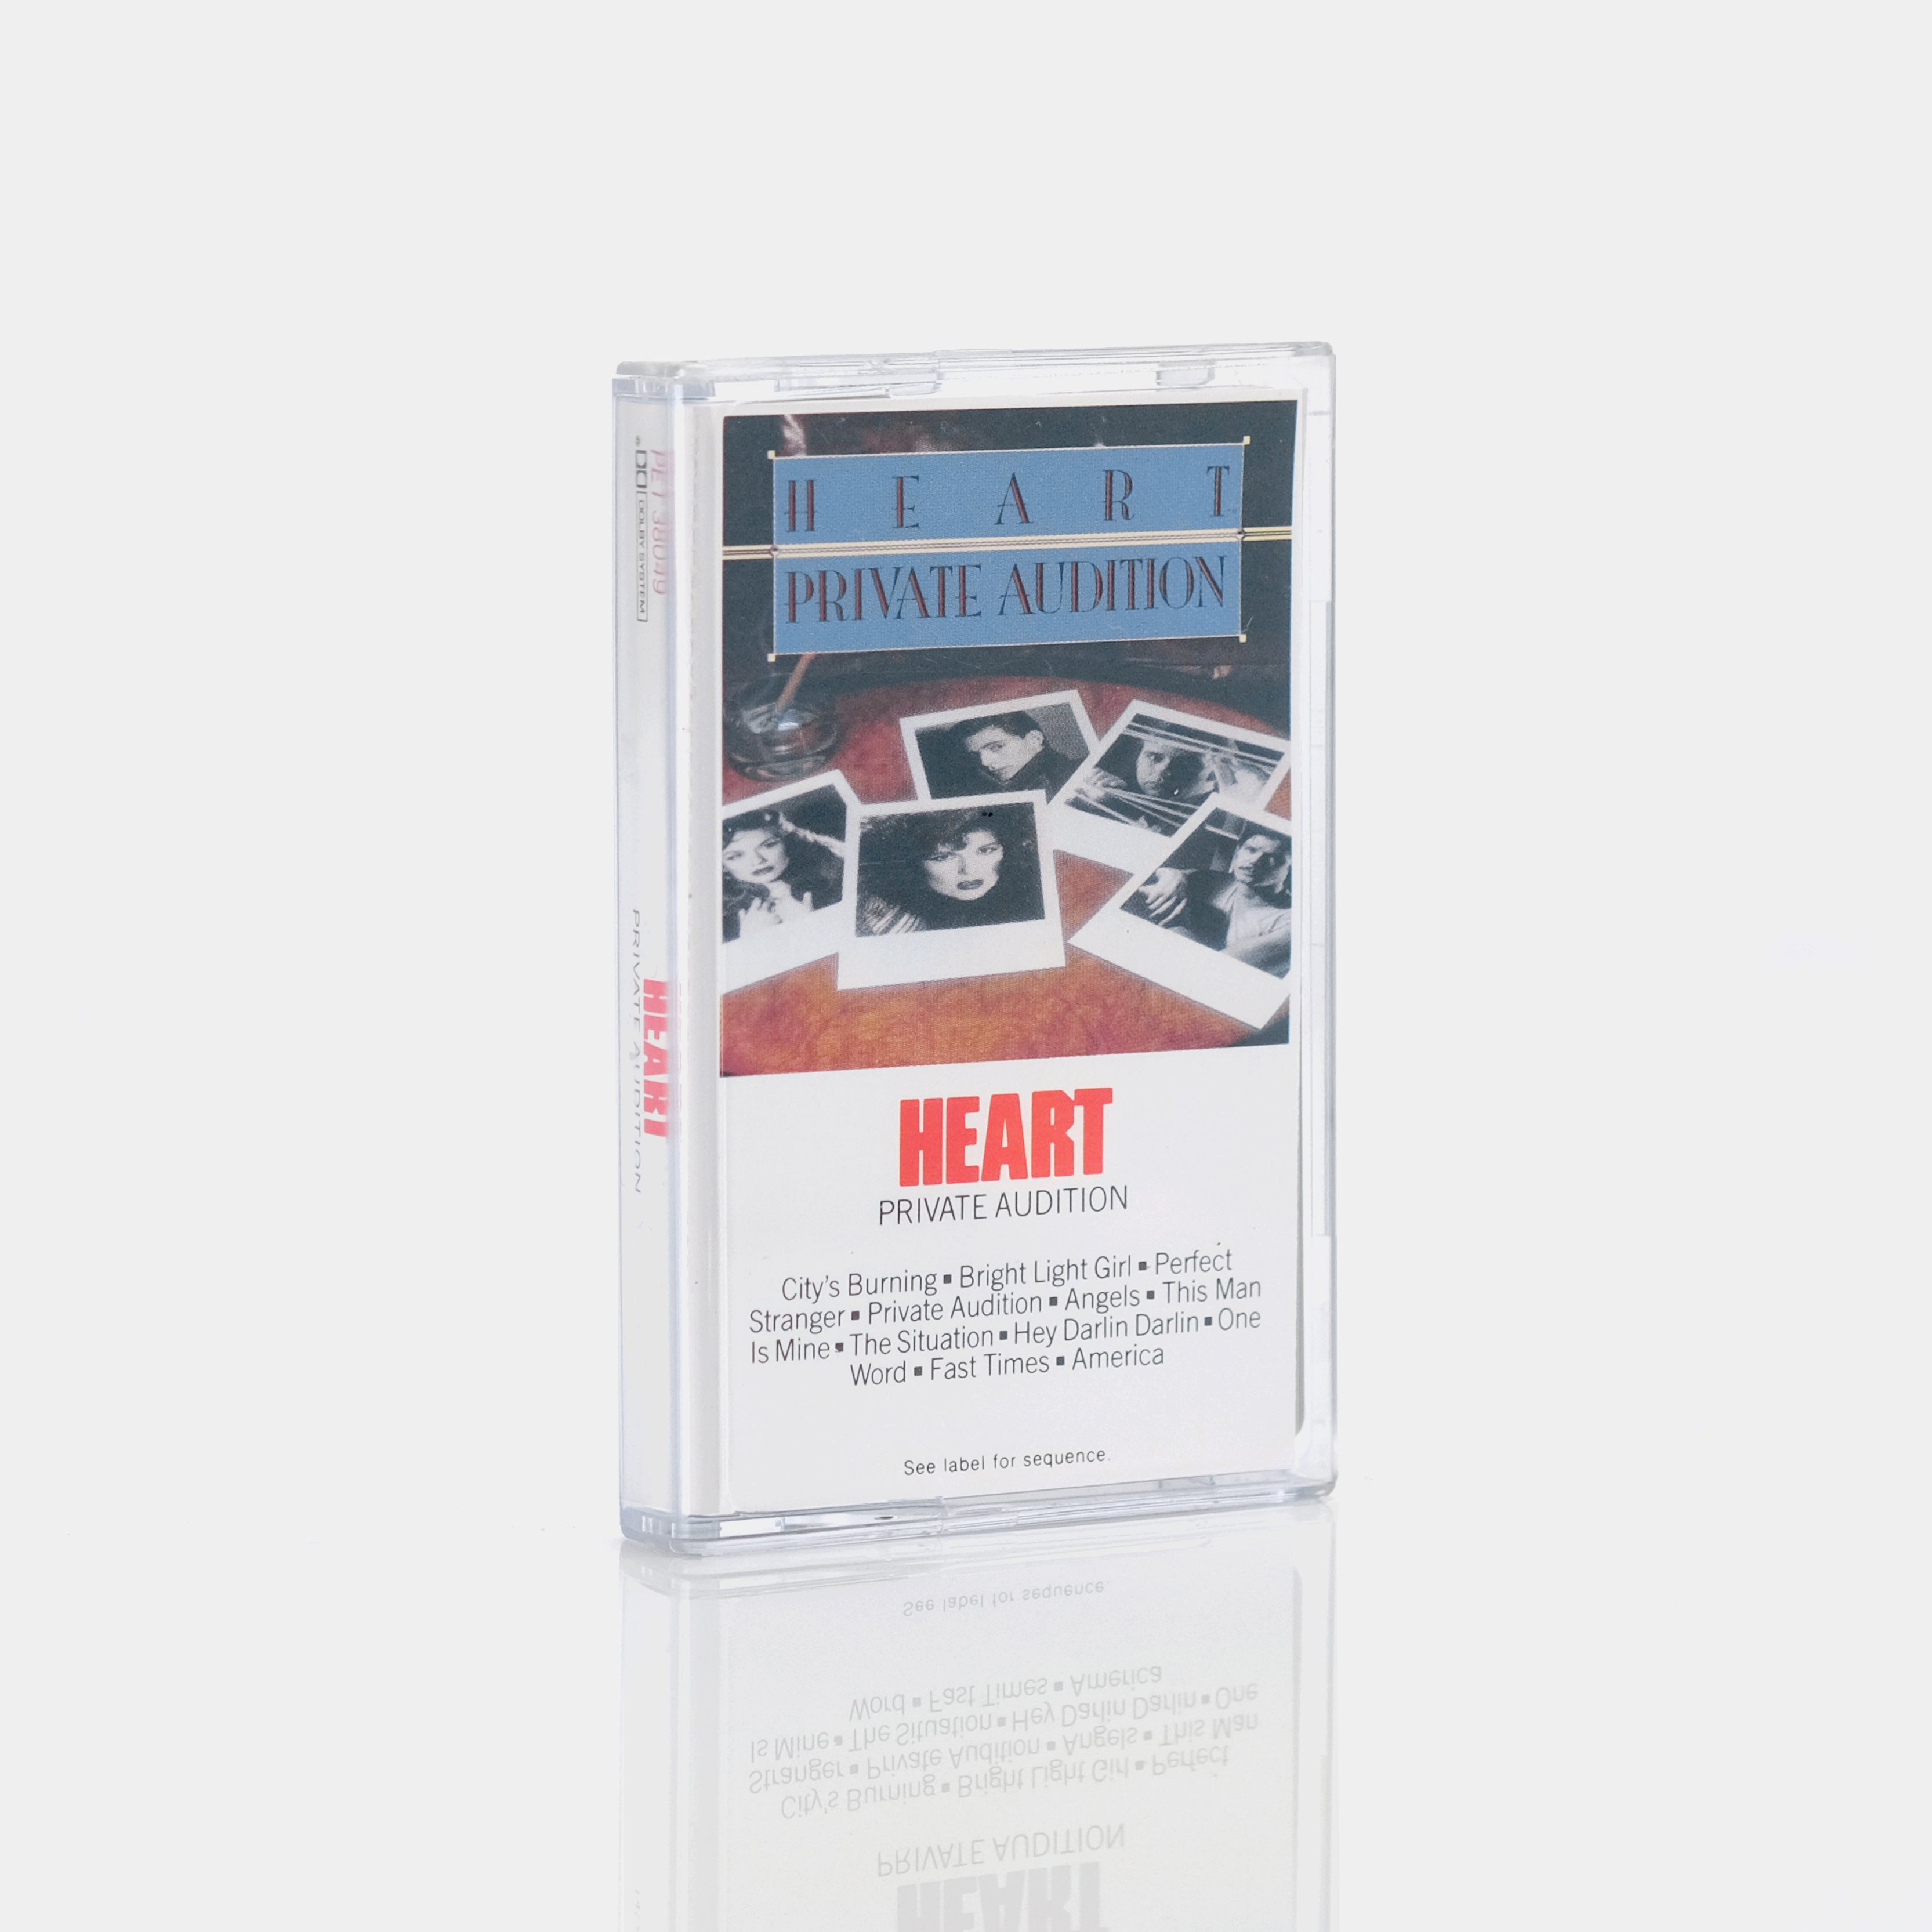 Heart - Private Audition Cassette Tape